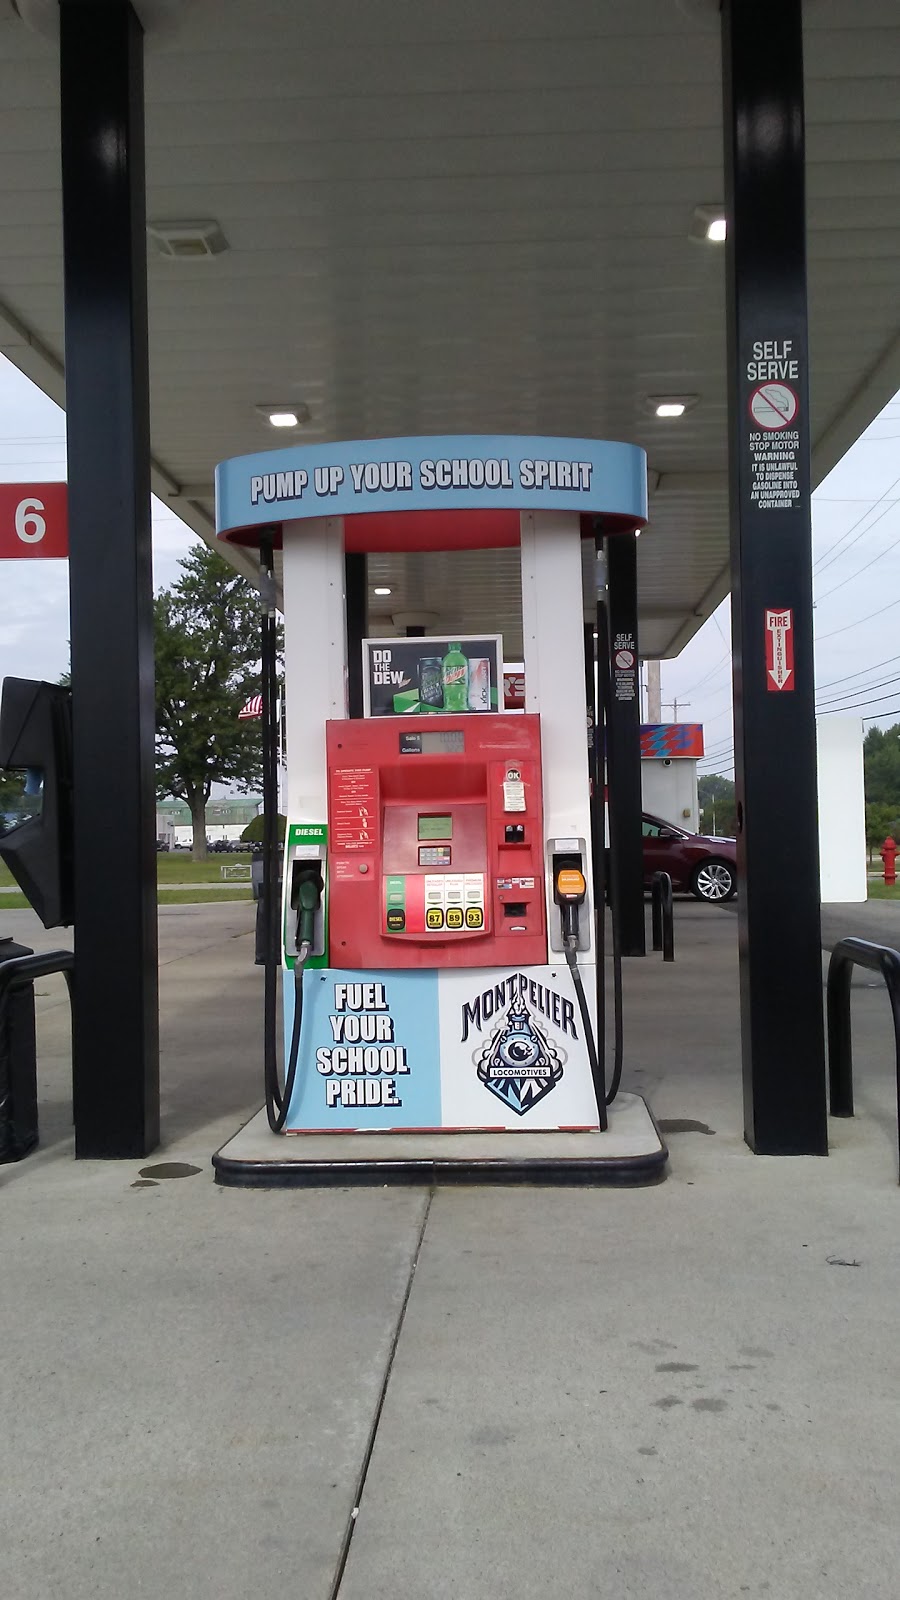 Millers Gas Station | 101 Glen Dr, Montpelier, OH 43543, USA | Phone: (419) 485-5286